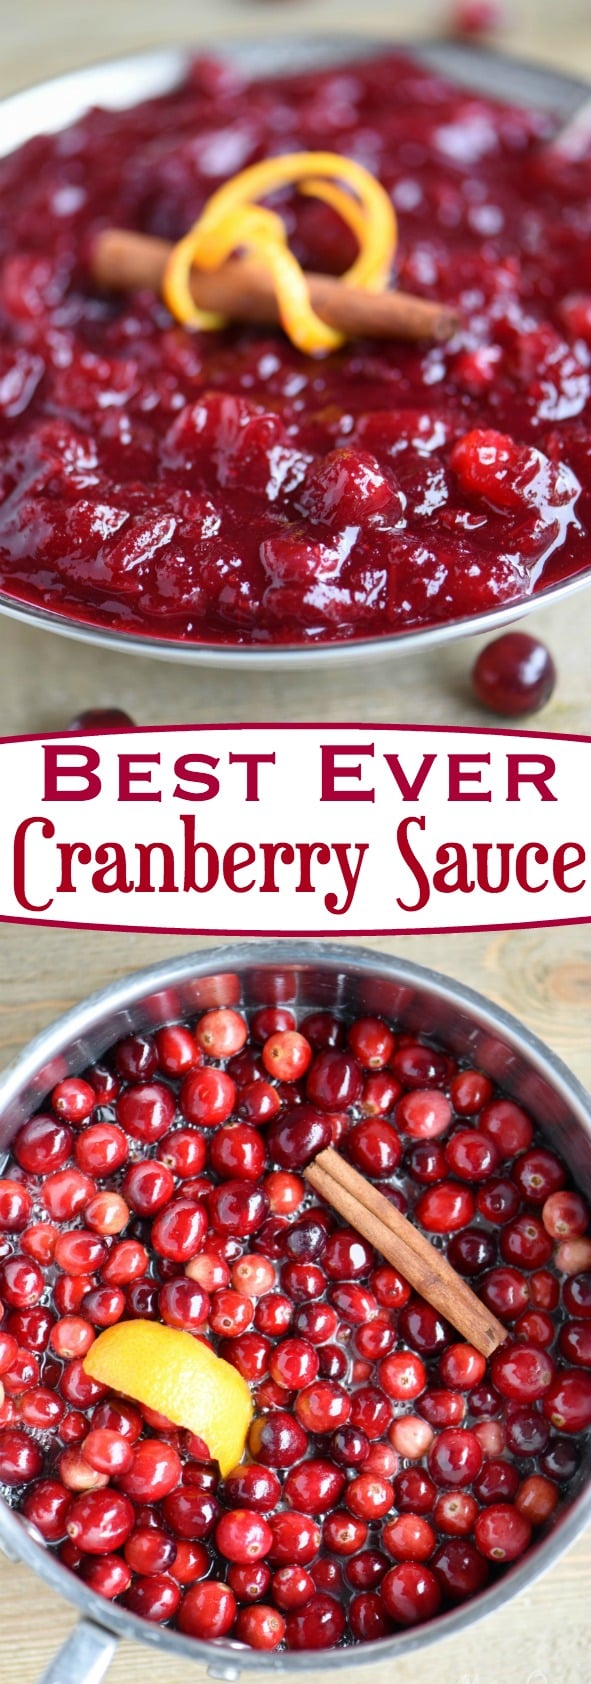 Look no further for the Best Ever Cranberry Sauce! This easy and delightful recipe takes only 15 minutes to make and a handful of ingredients! Spiced with cinnamon and sweetened with orange juice, it is the best combination of sweet and tart! The perfect complement to your holiday meal! // Mom On Timeout